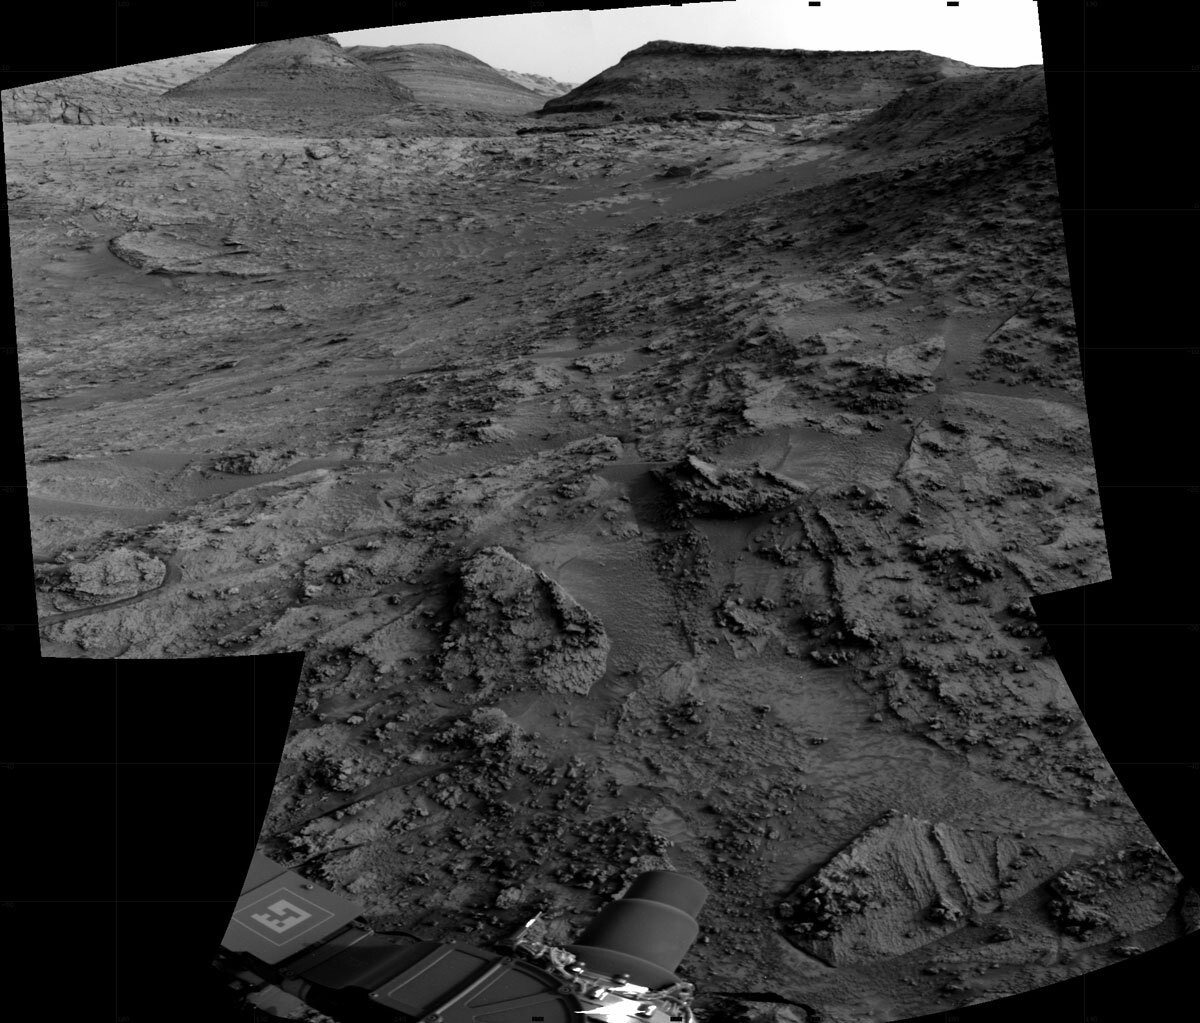 NASA's Mars rover Curiosity took 3 images in Gale Crater using its mast-mounted Right Navigation Camera (Navcam) to create this mosaic.